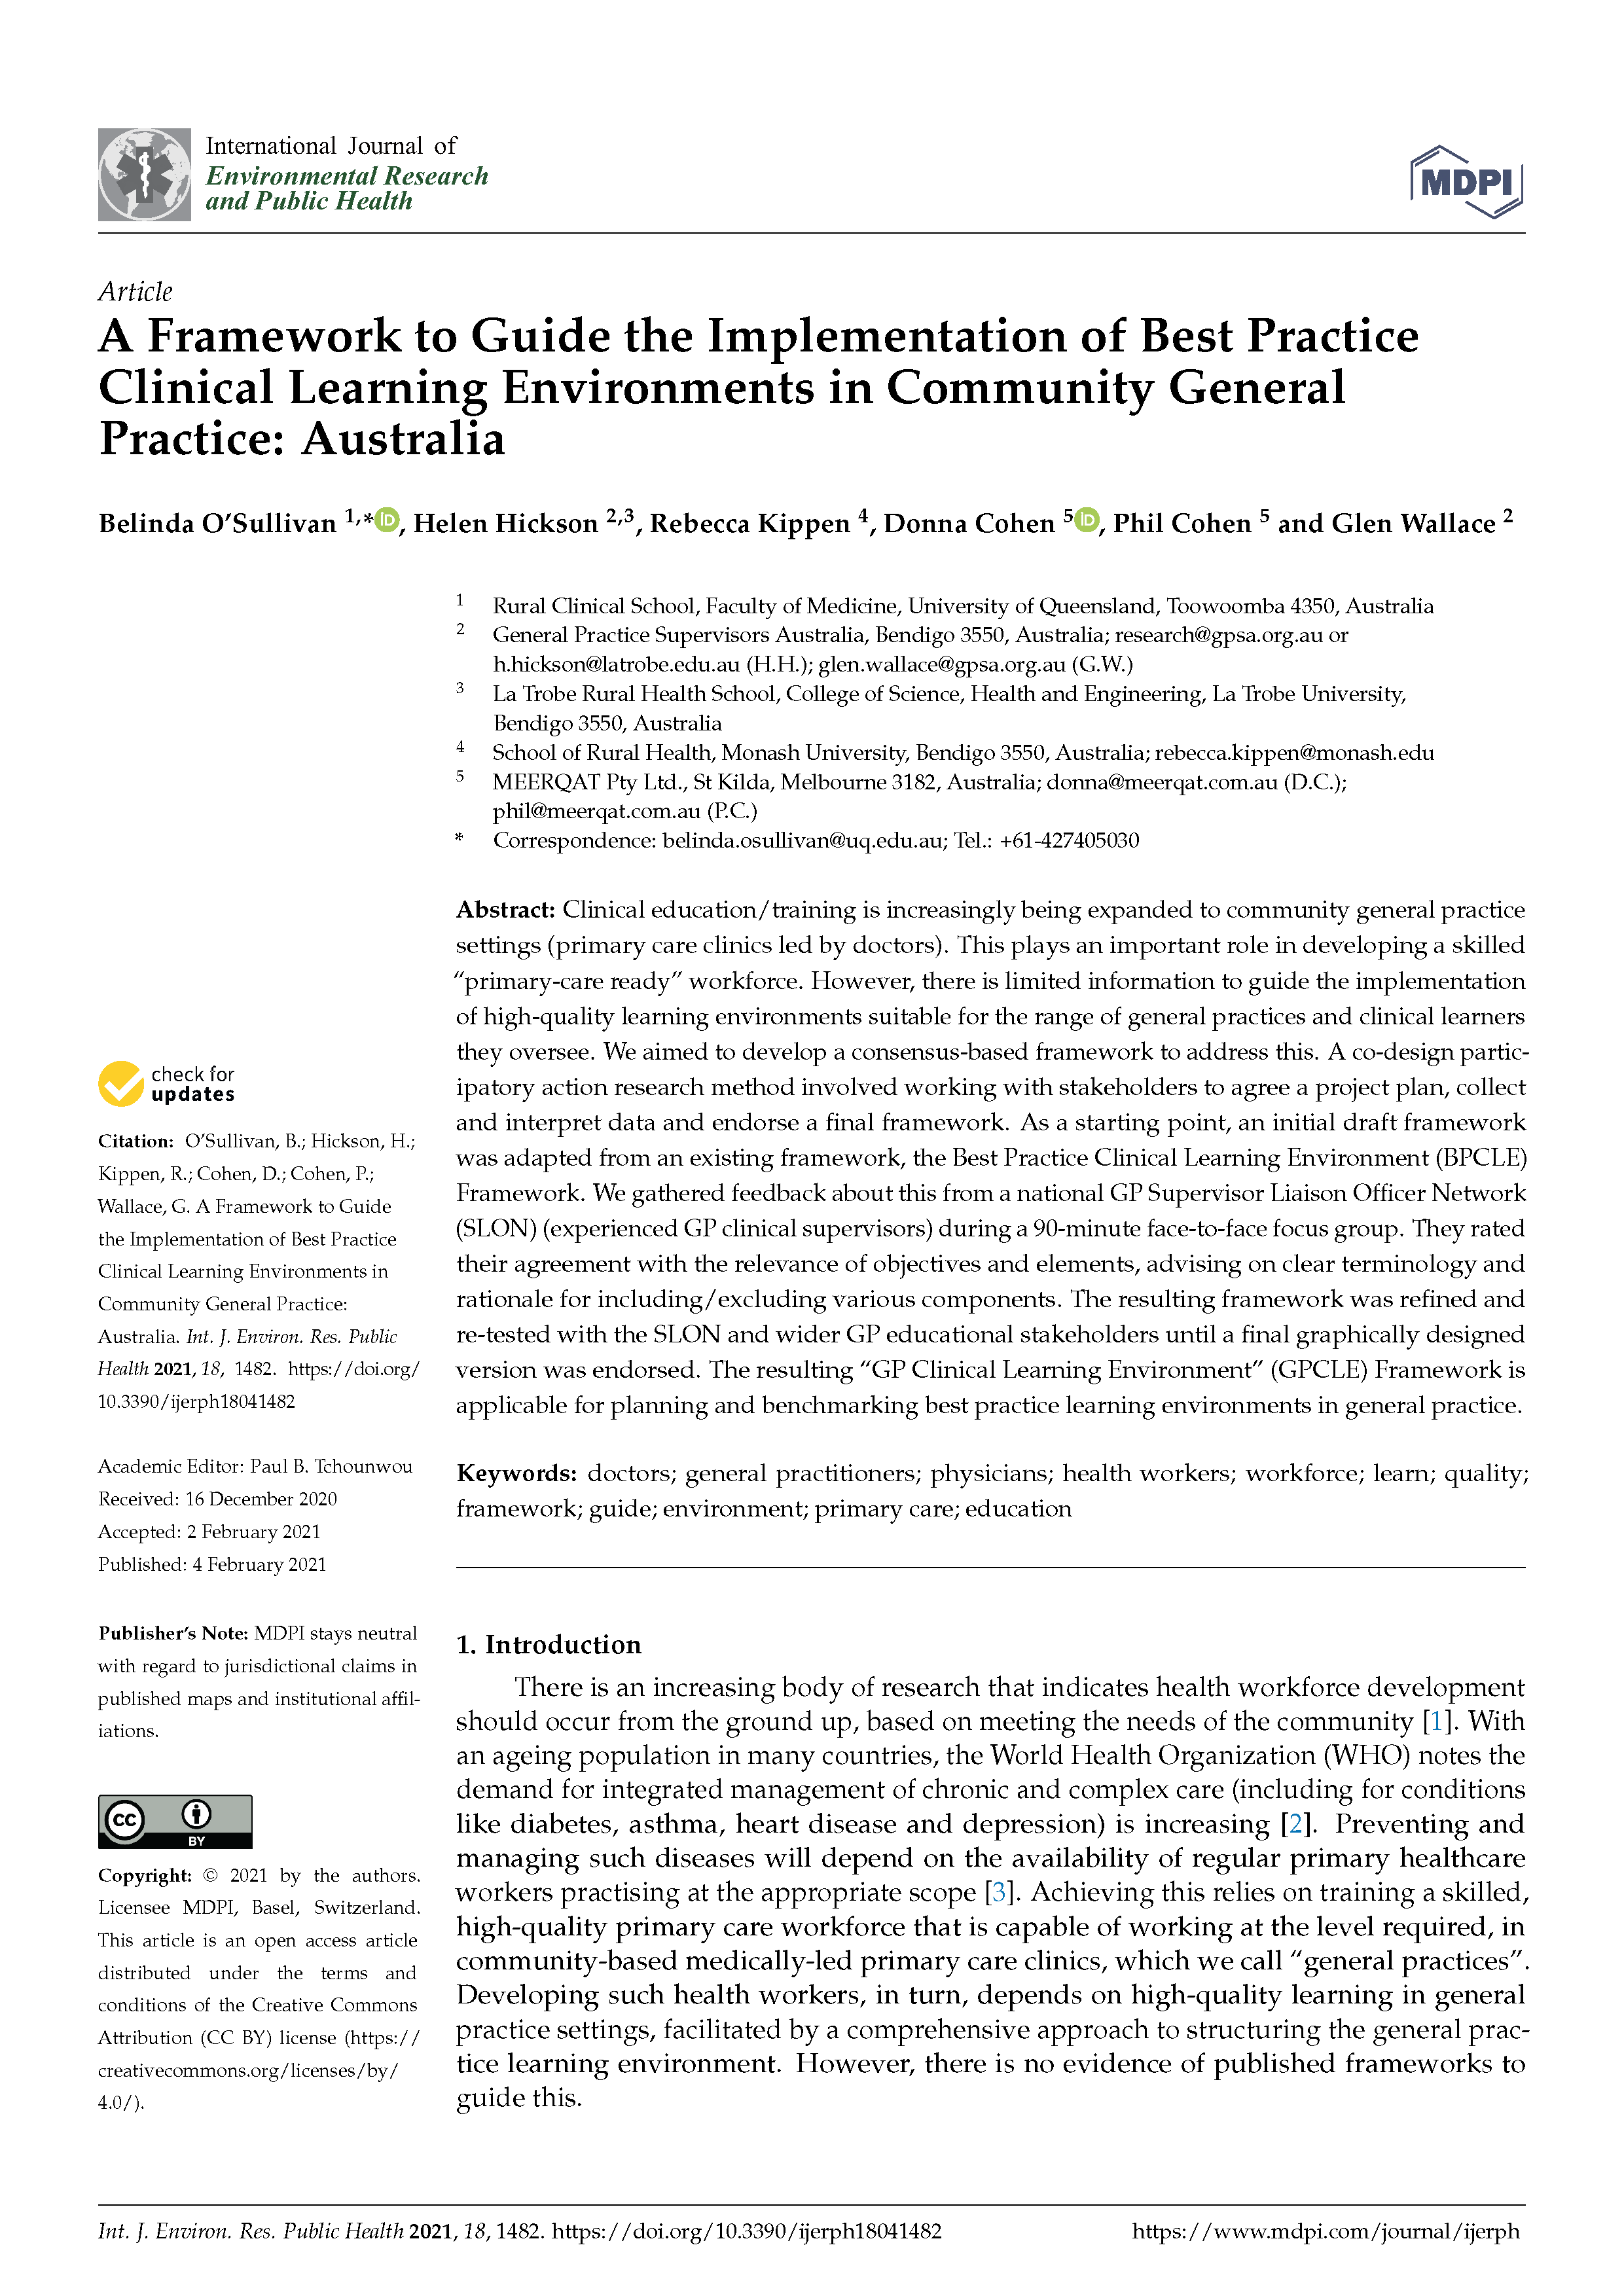 Best practice clinical learning environments